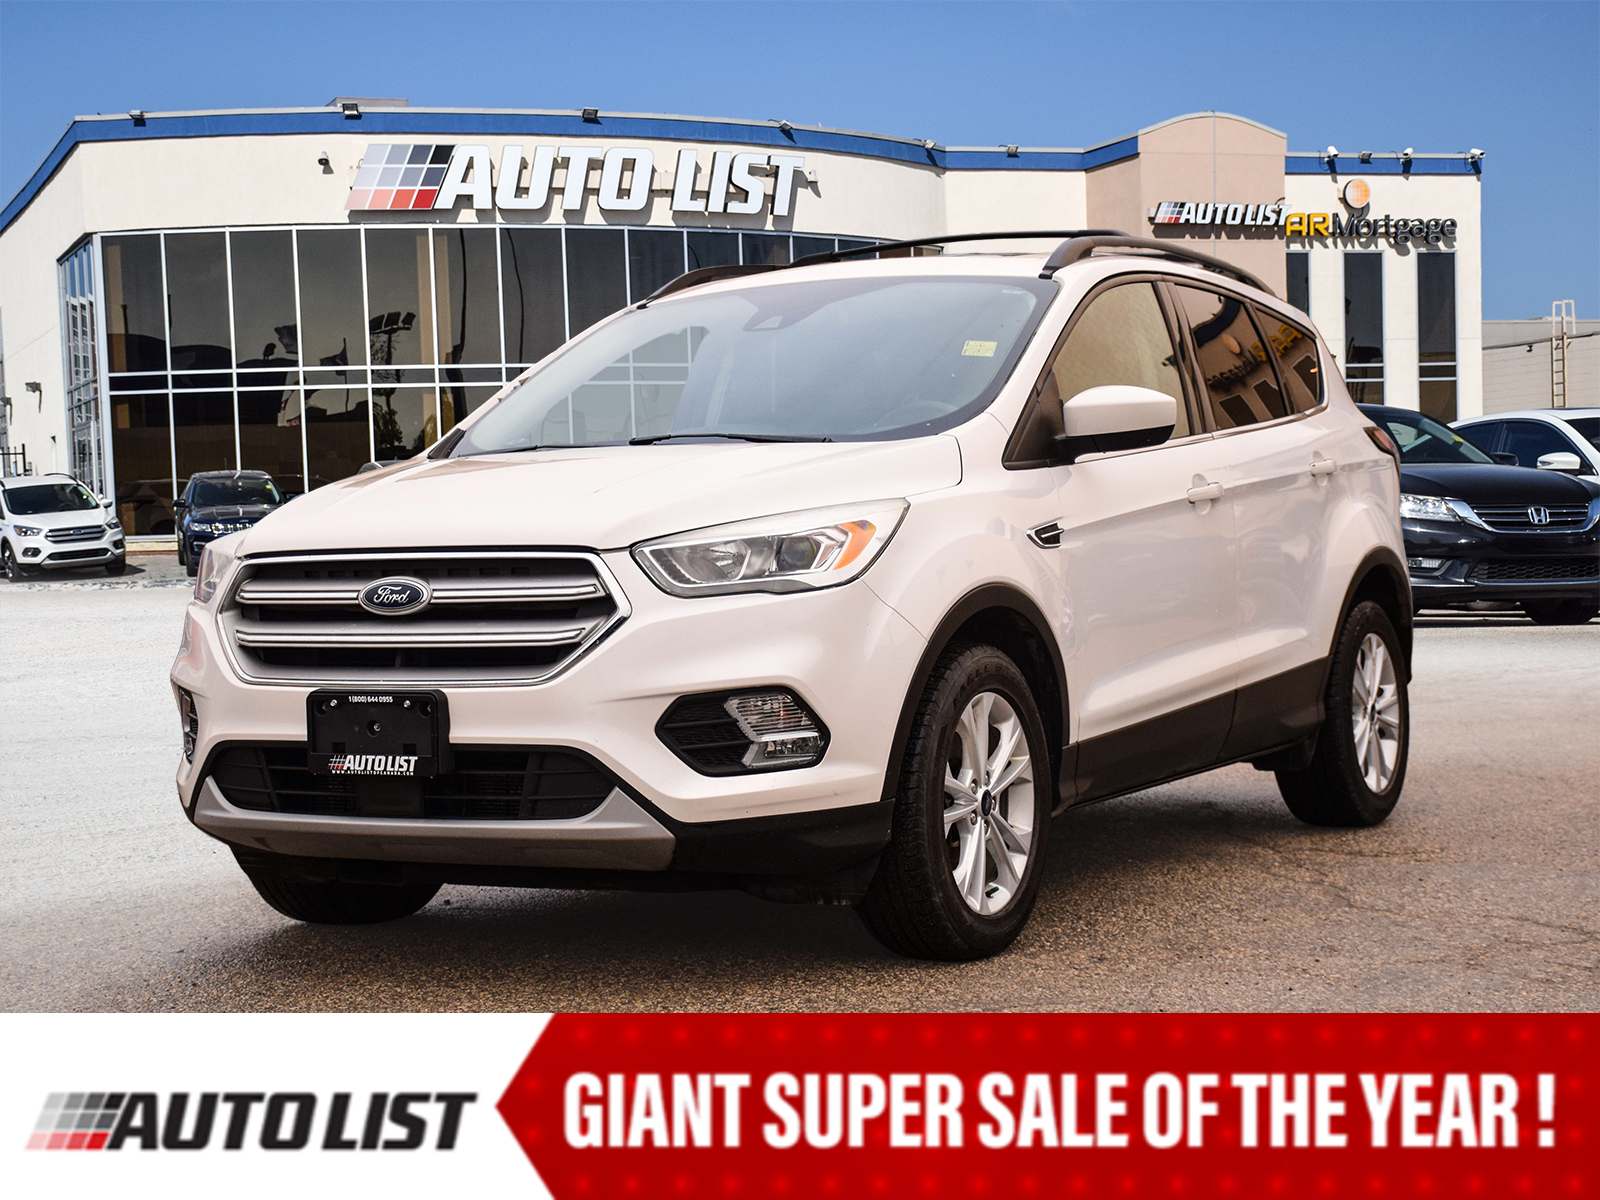 2018 Ford Escape SEL 4WD*ADAPTIVE CRUISE*PANOROOF*LEATHER*NAVI*